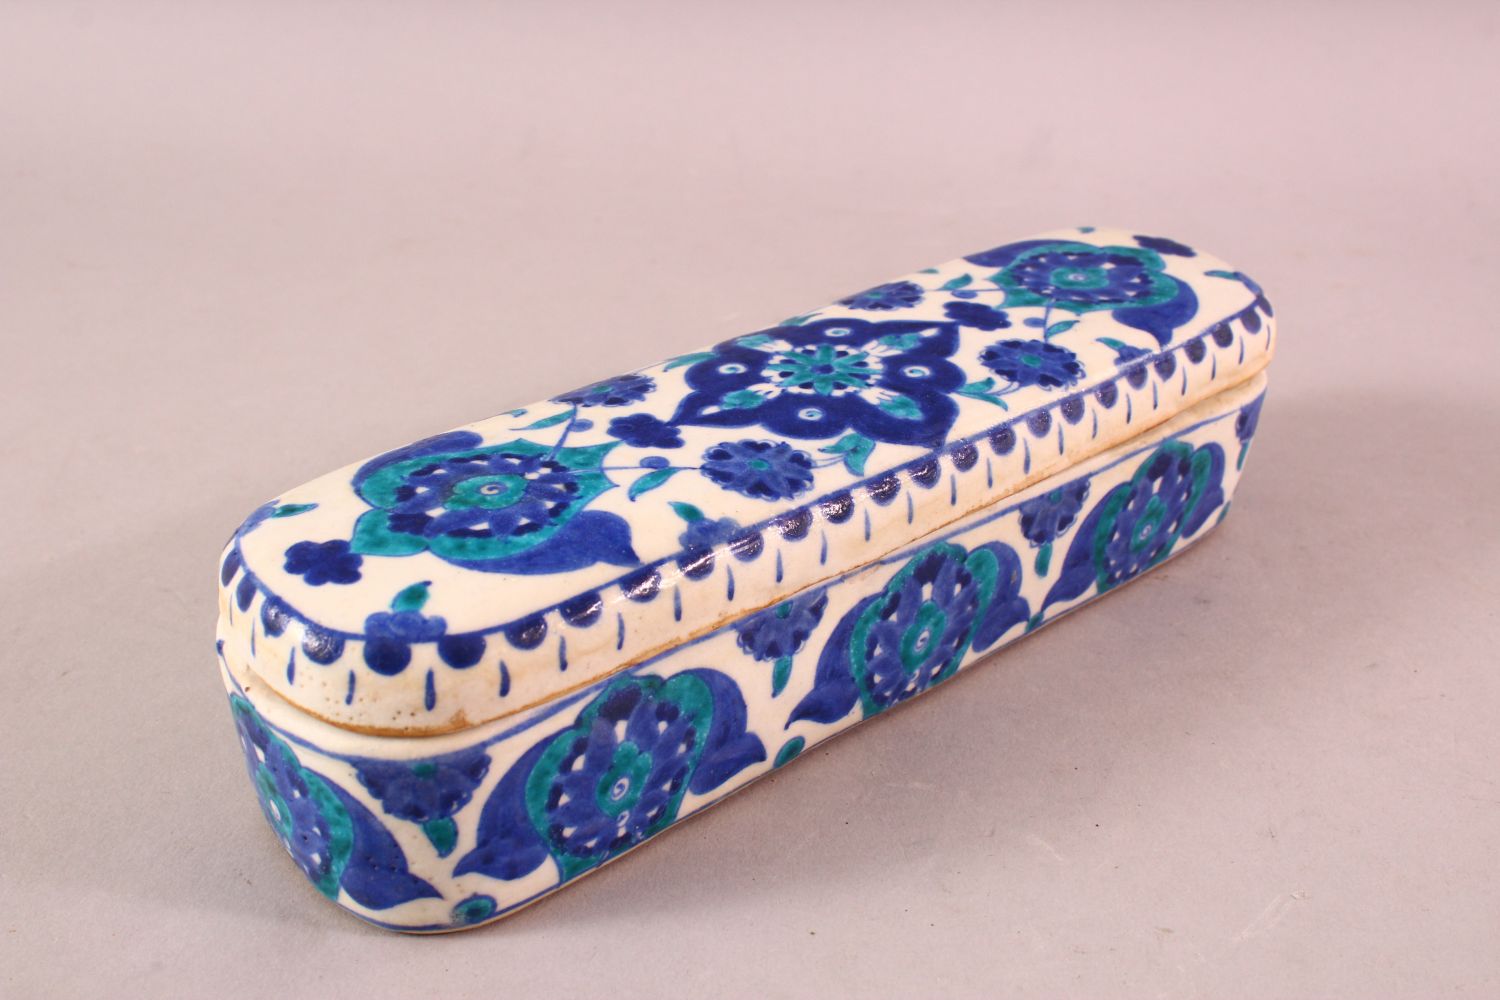 A TURKISH OTTOMAN KUTAHYA POTTERY PEN BOX & COVER, in blue and white floral decoration, 23cm - Image 2 of 4